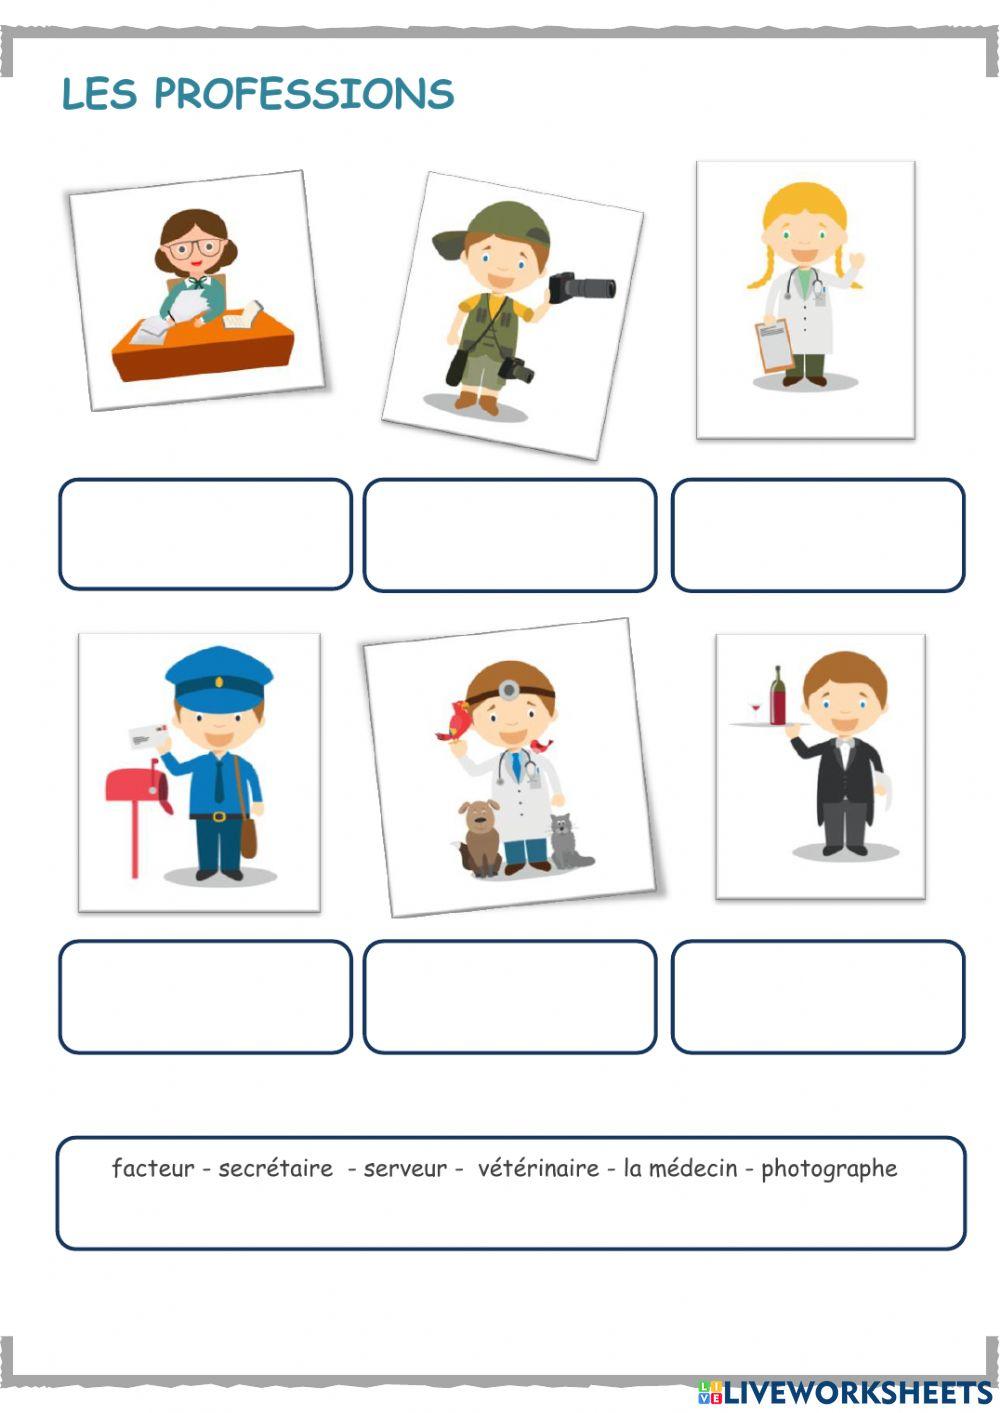 Les professions online exercise for Primaria | Live Worksheets